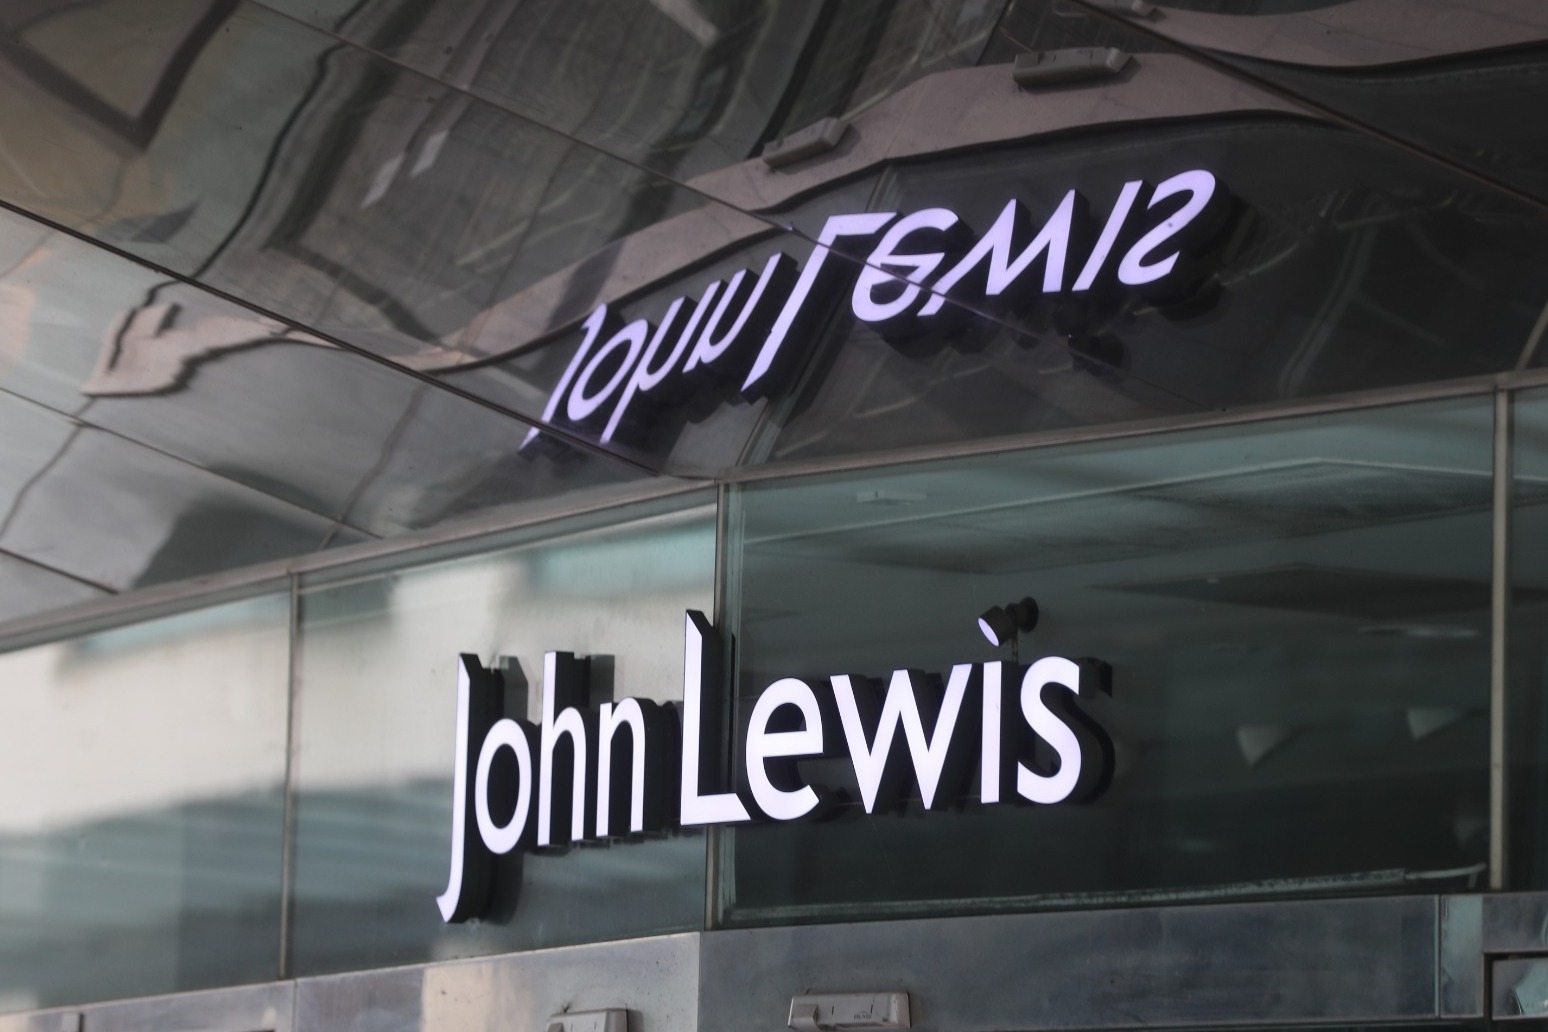 John Lewis boss to face confidence vote over leadership 